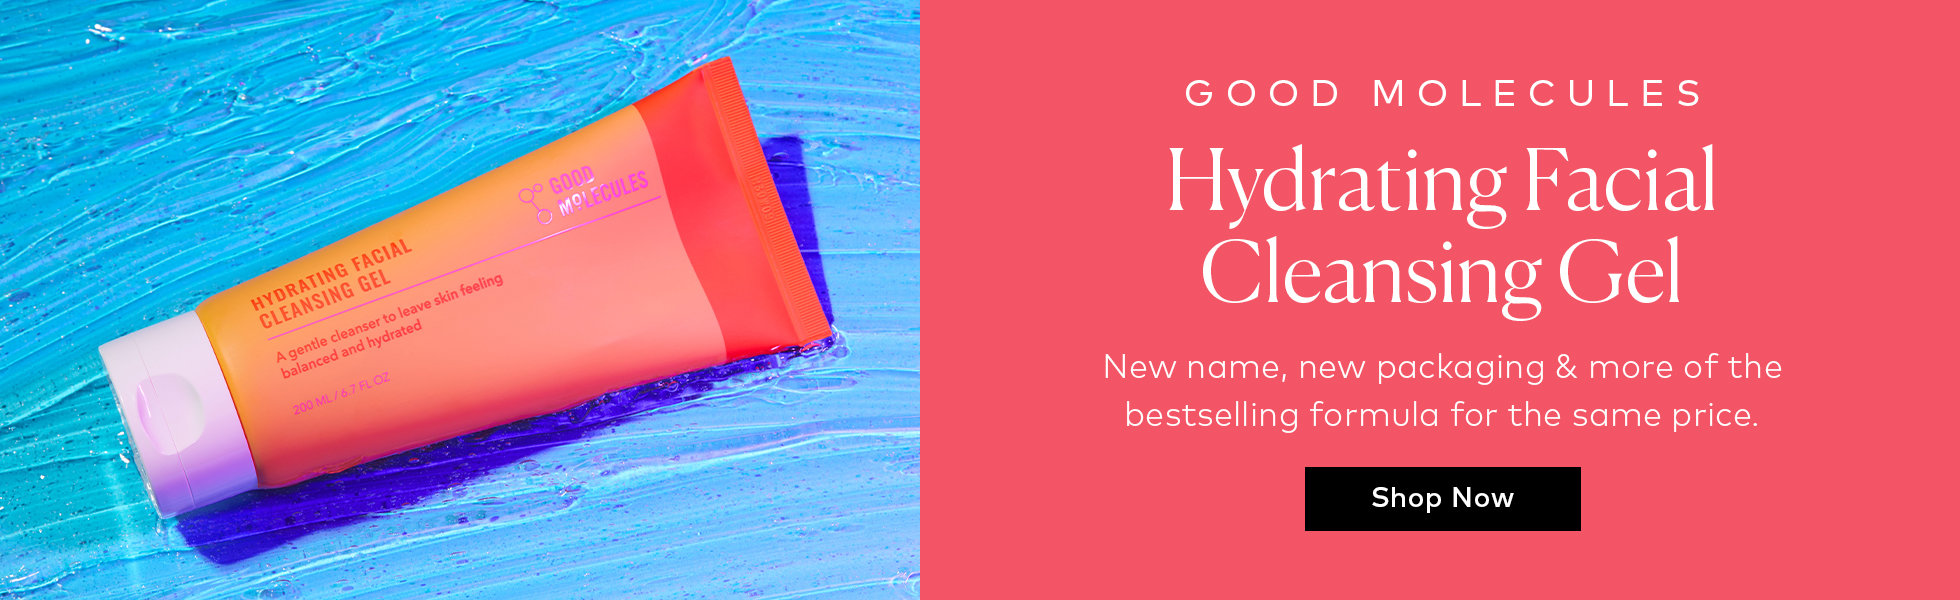 Shop the Good Molecules Hydrating Facial Cleansing Gel at Beautylish.com